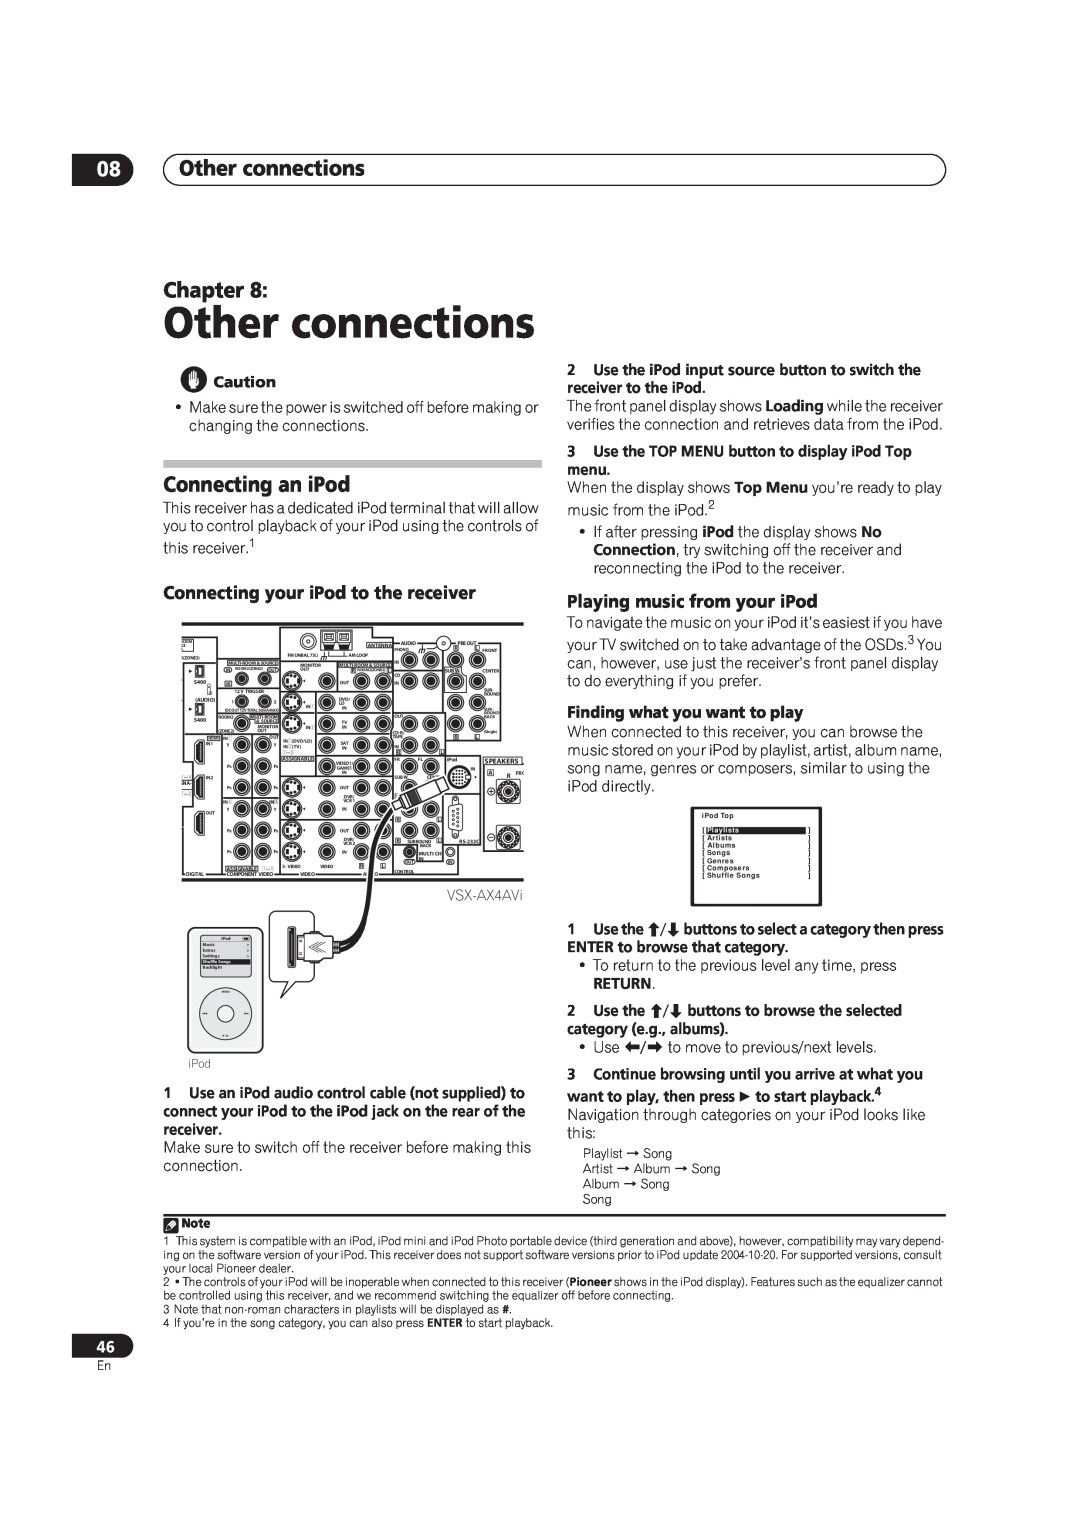 Pioneer VSX-AX4AVi-S, VSX-AX2AV-S Other connections Chapter, Connecting an iPod, Connecting your iPod to the receiver 